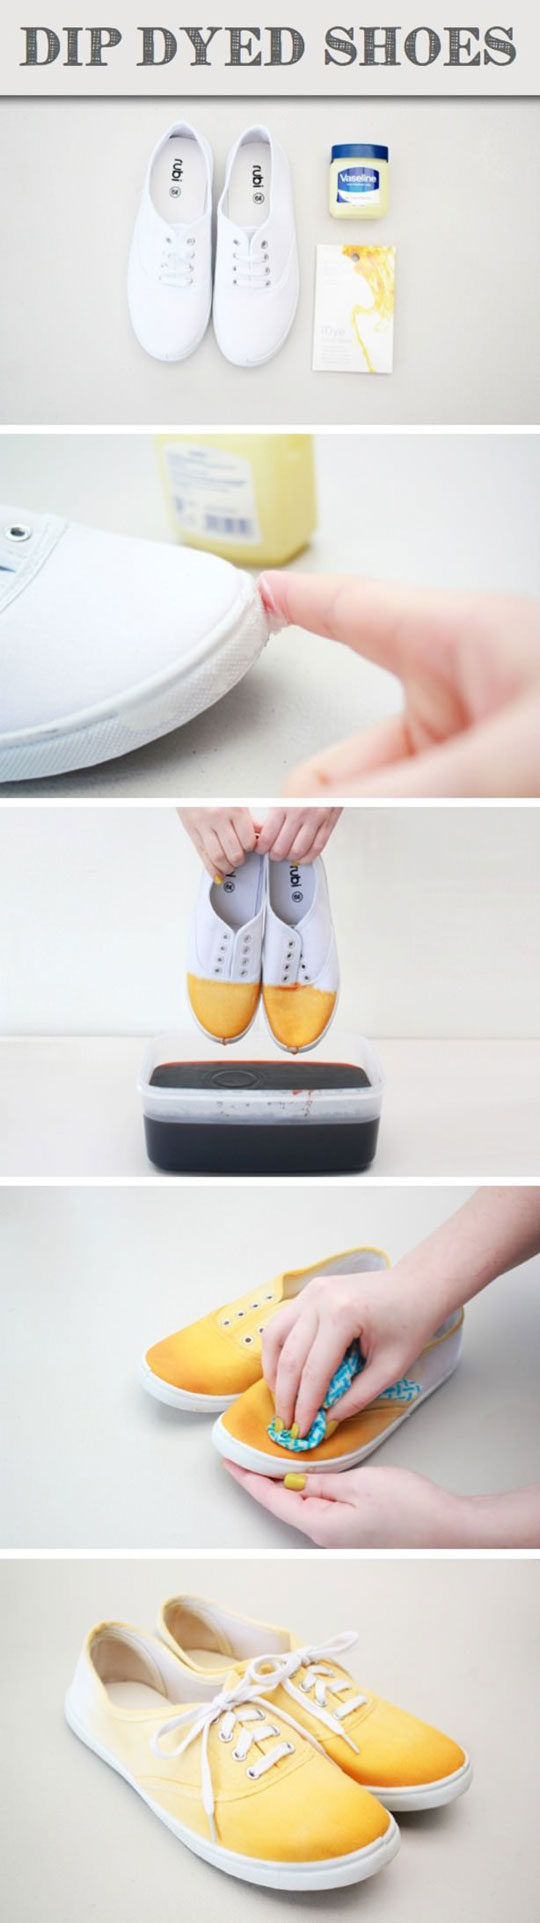 Cool Stuff You Can Do With Your Shoes